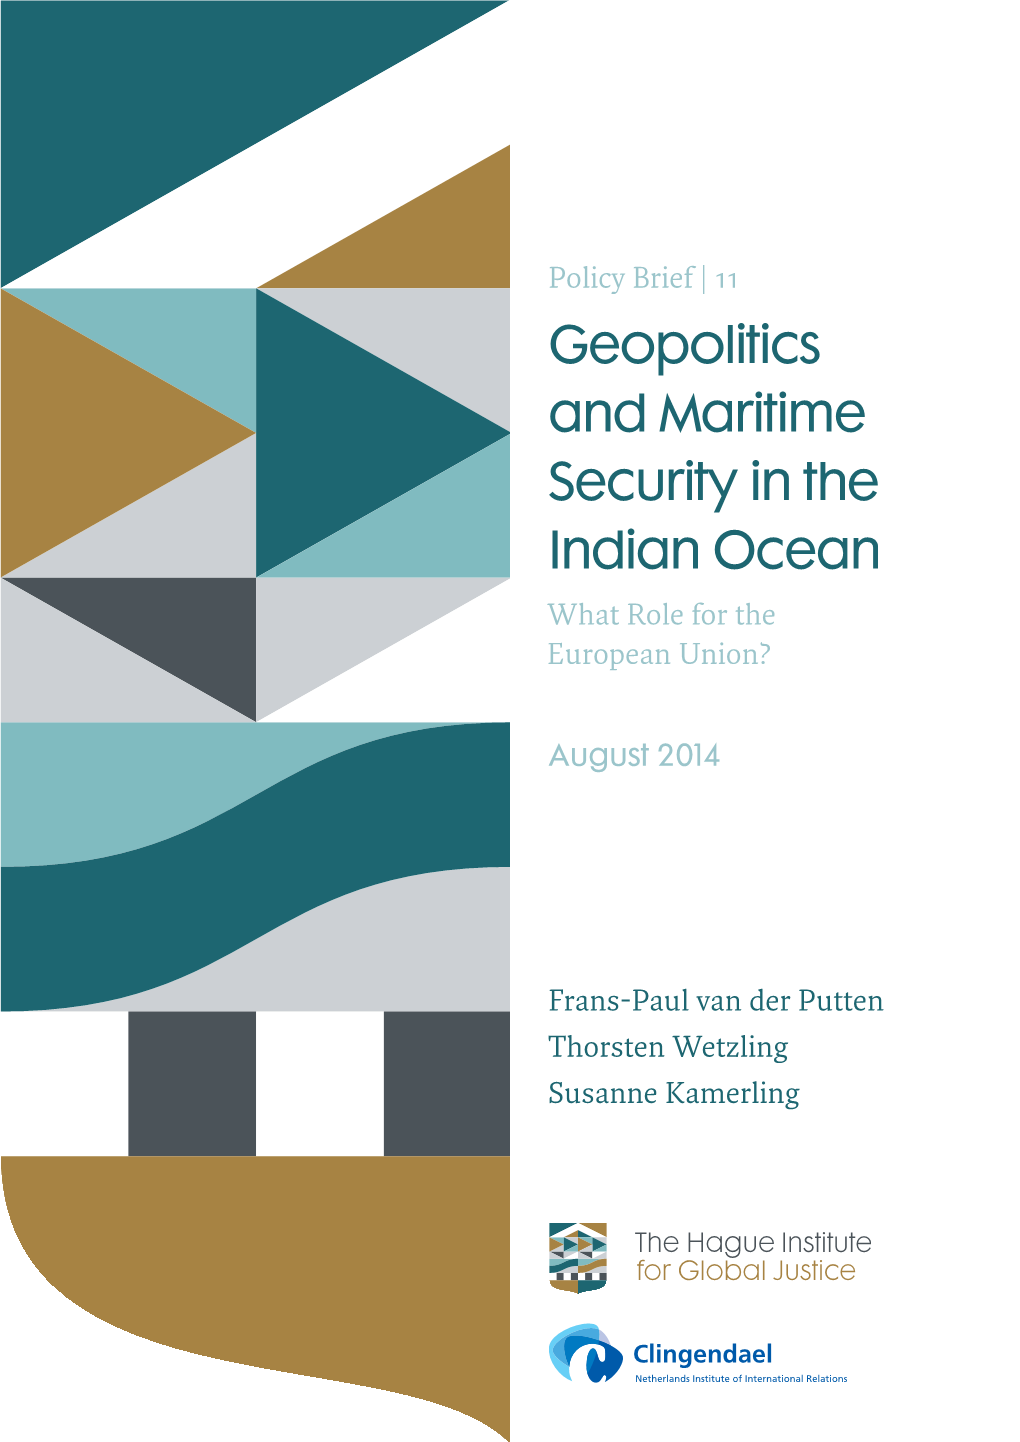 Geopolitics and Maritime Security in the Indian Ocean What Role for the European Union?